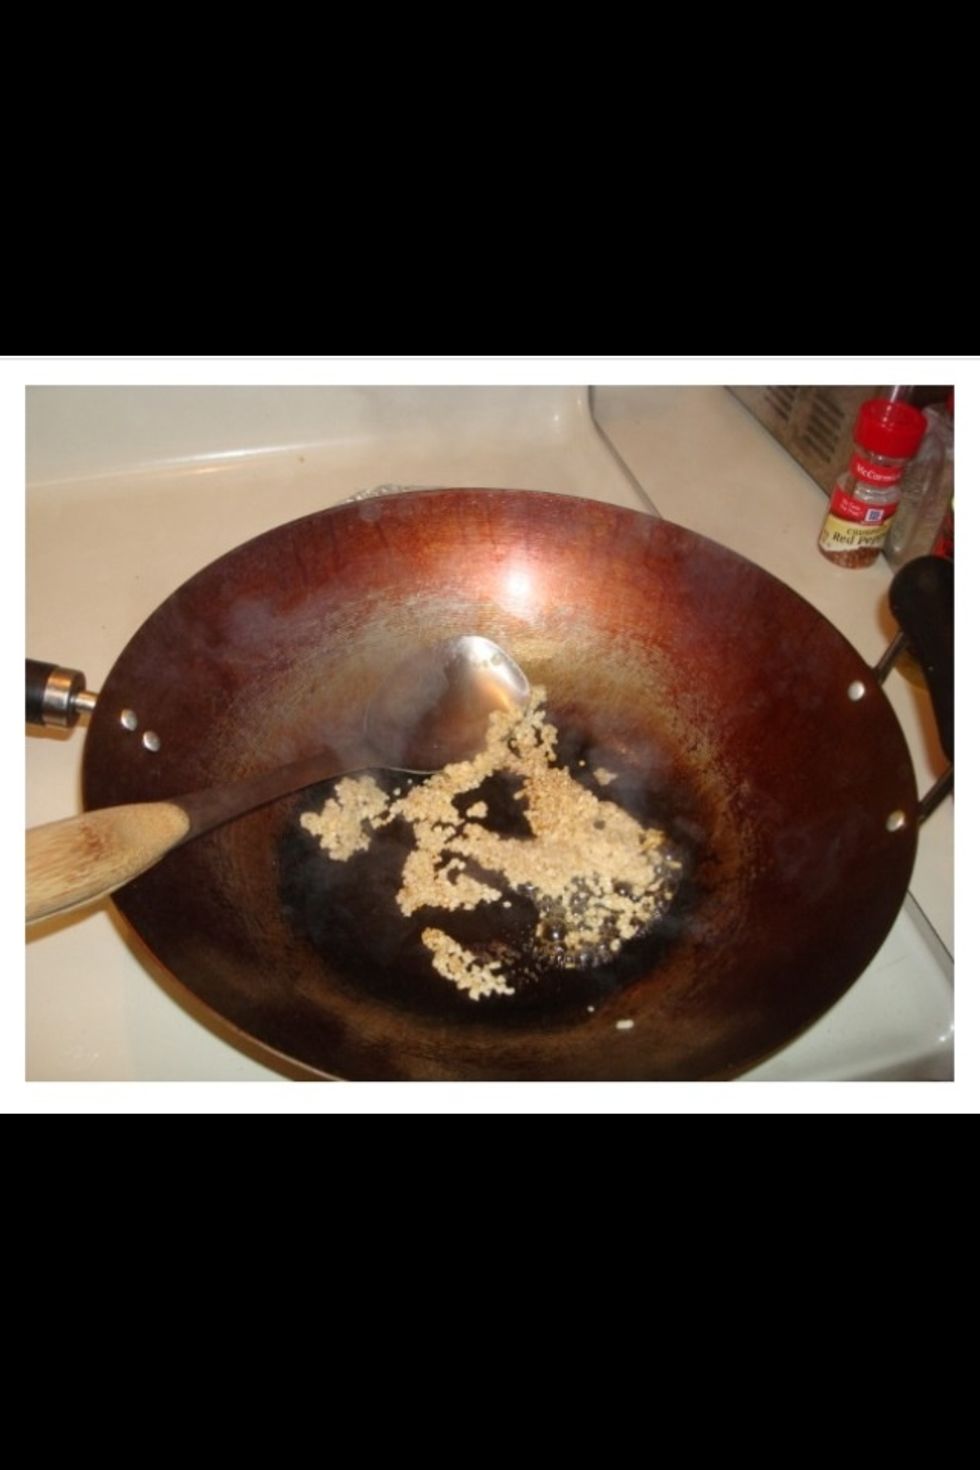 When your rice has about 15-20min left, heat your wok and gather your ingredients.  Begin your stir fry by adding a small amount of stir fry oil to the hot wok and then adding garlic.